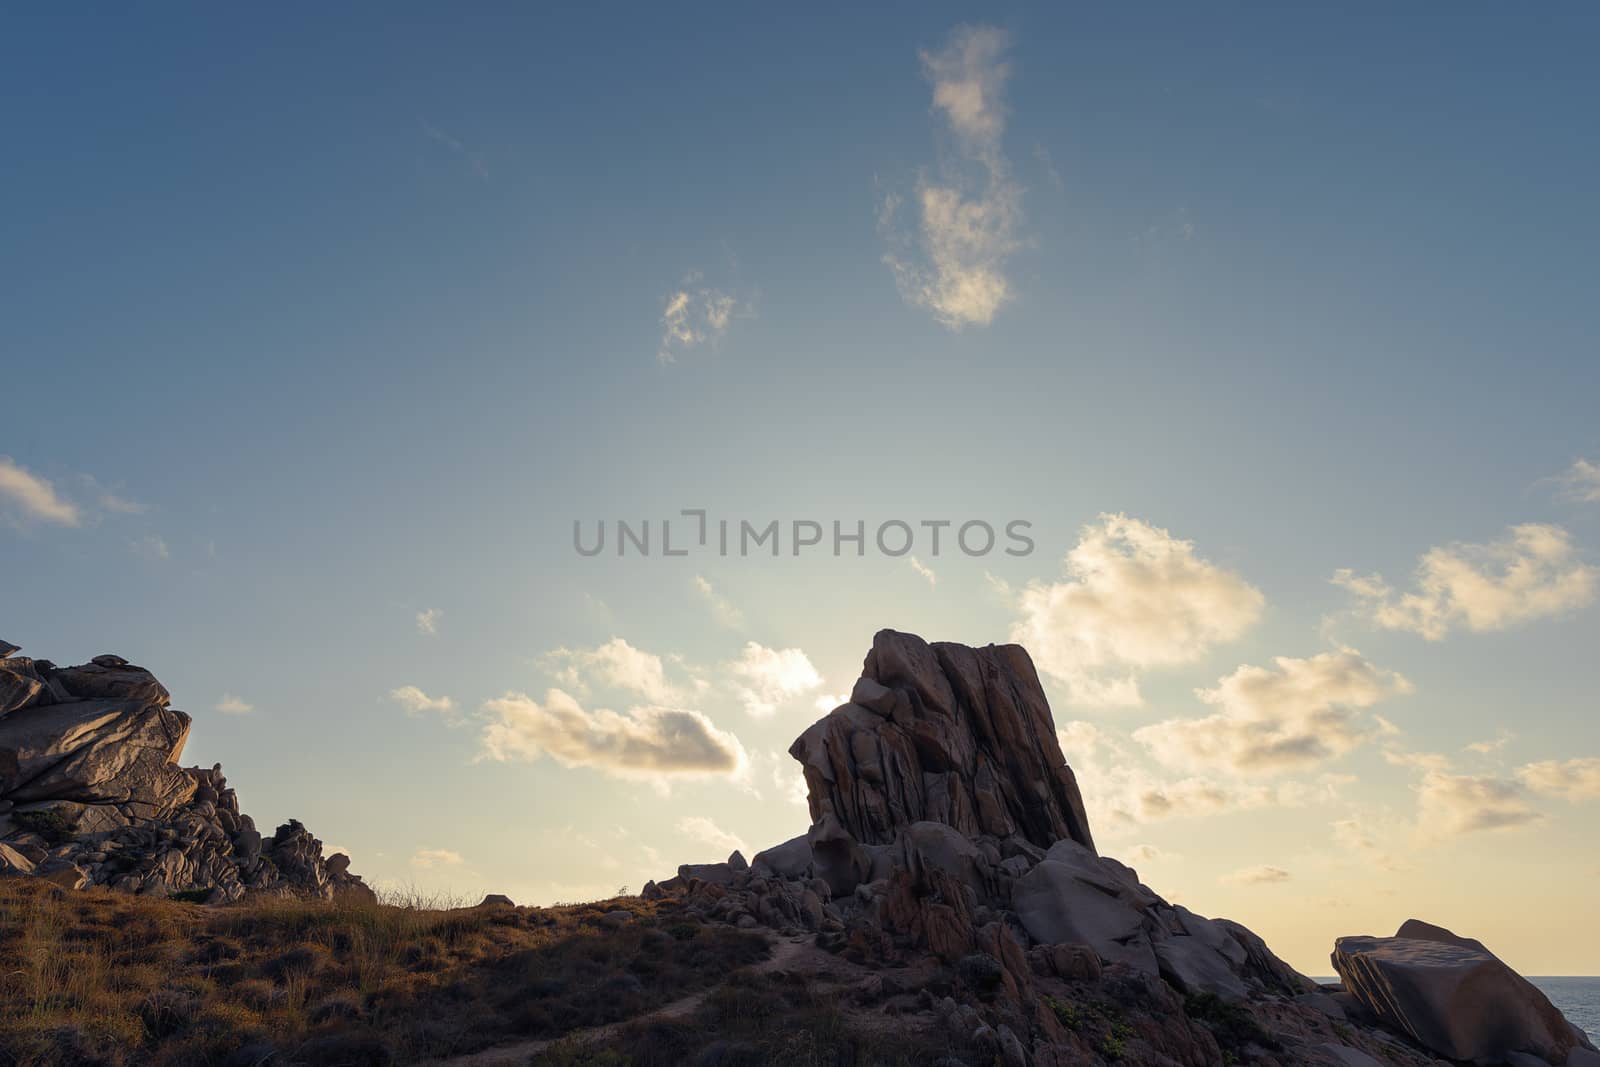 rocky nature landscape by the coast, the sunset sun shines in the clear sky with few clouds and illuminates some rocks and bushes, Copy space, Capo Testa, Santa Teresa di Gallura, Sardinia, Italy